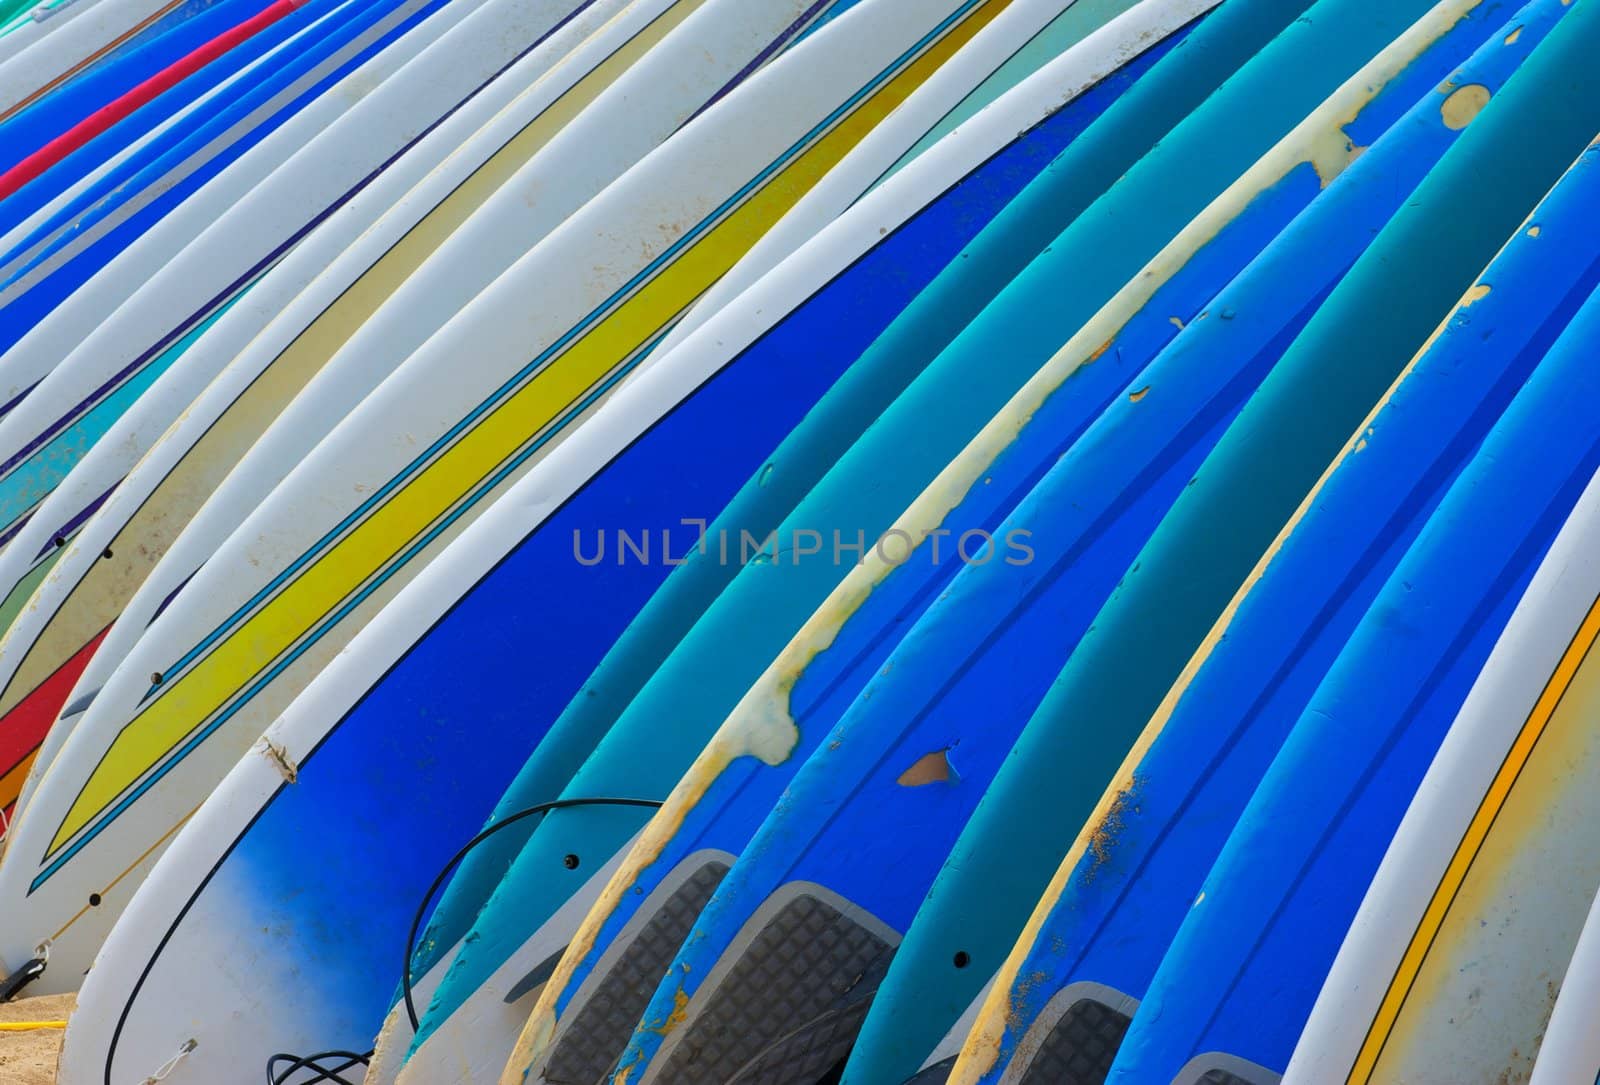 Row of Brightly Colored Surf Boards by pixelsnap